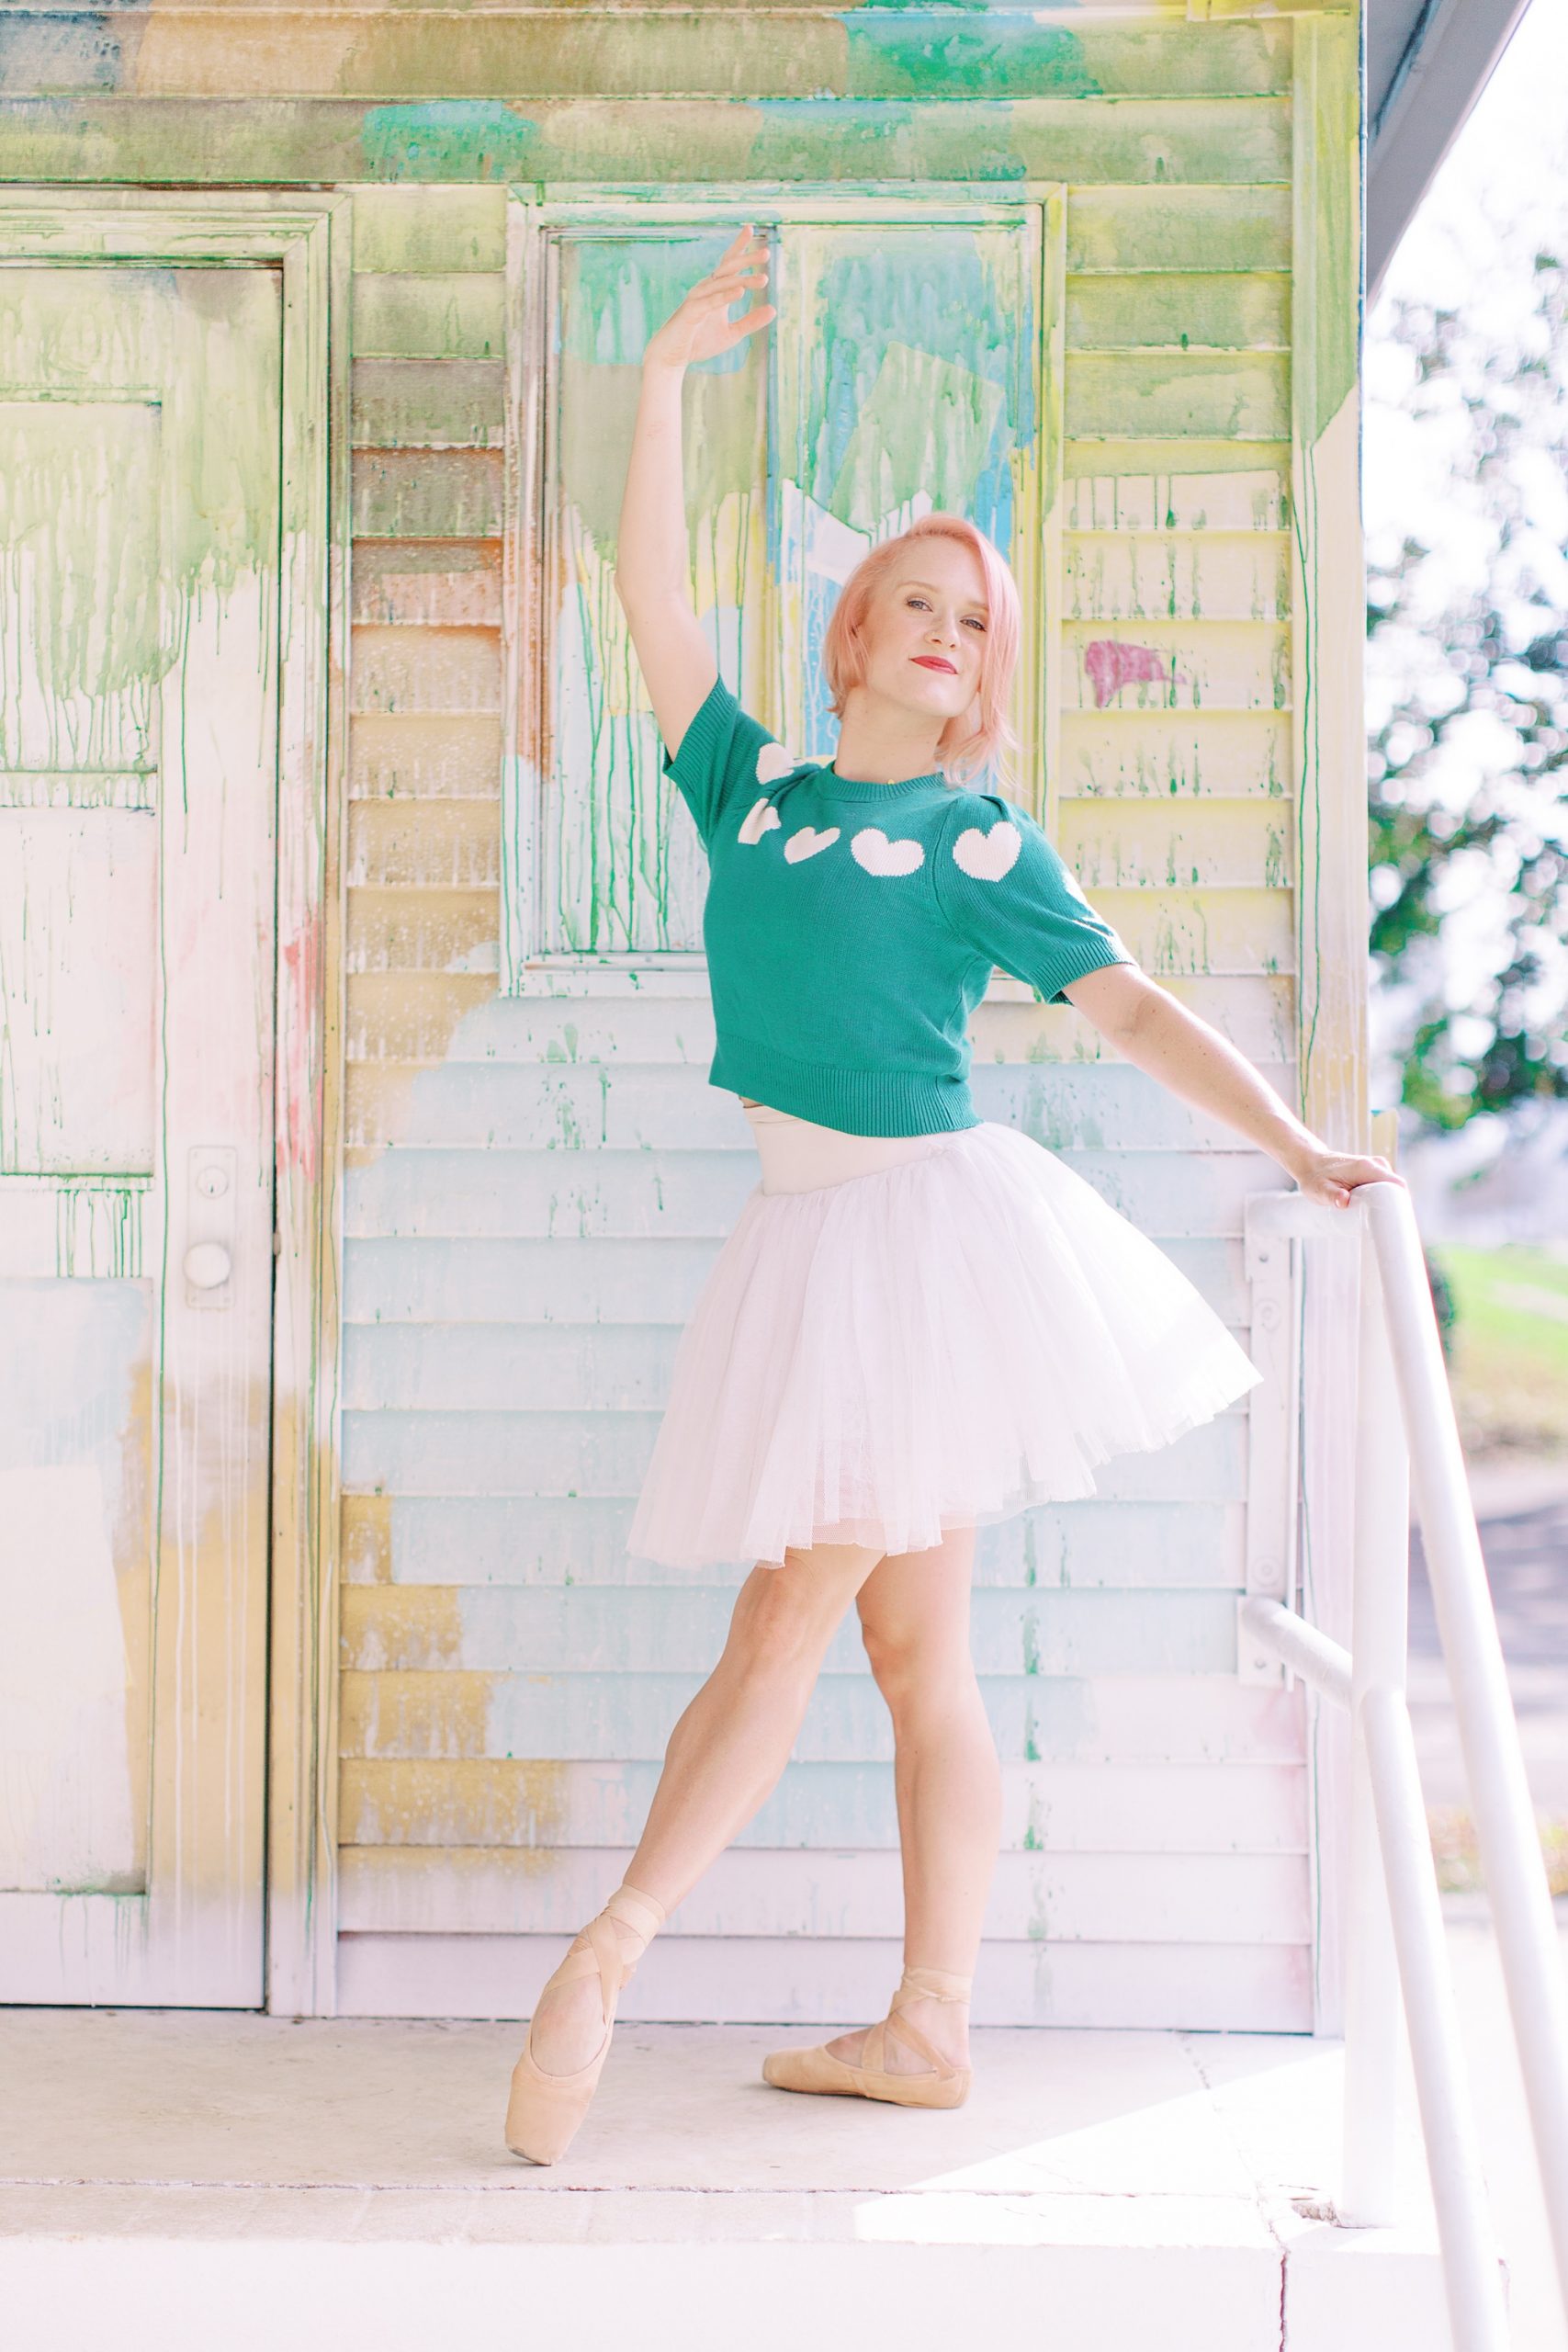 ballerina poses at top of stairs in pink tutu